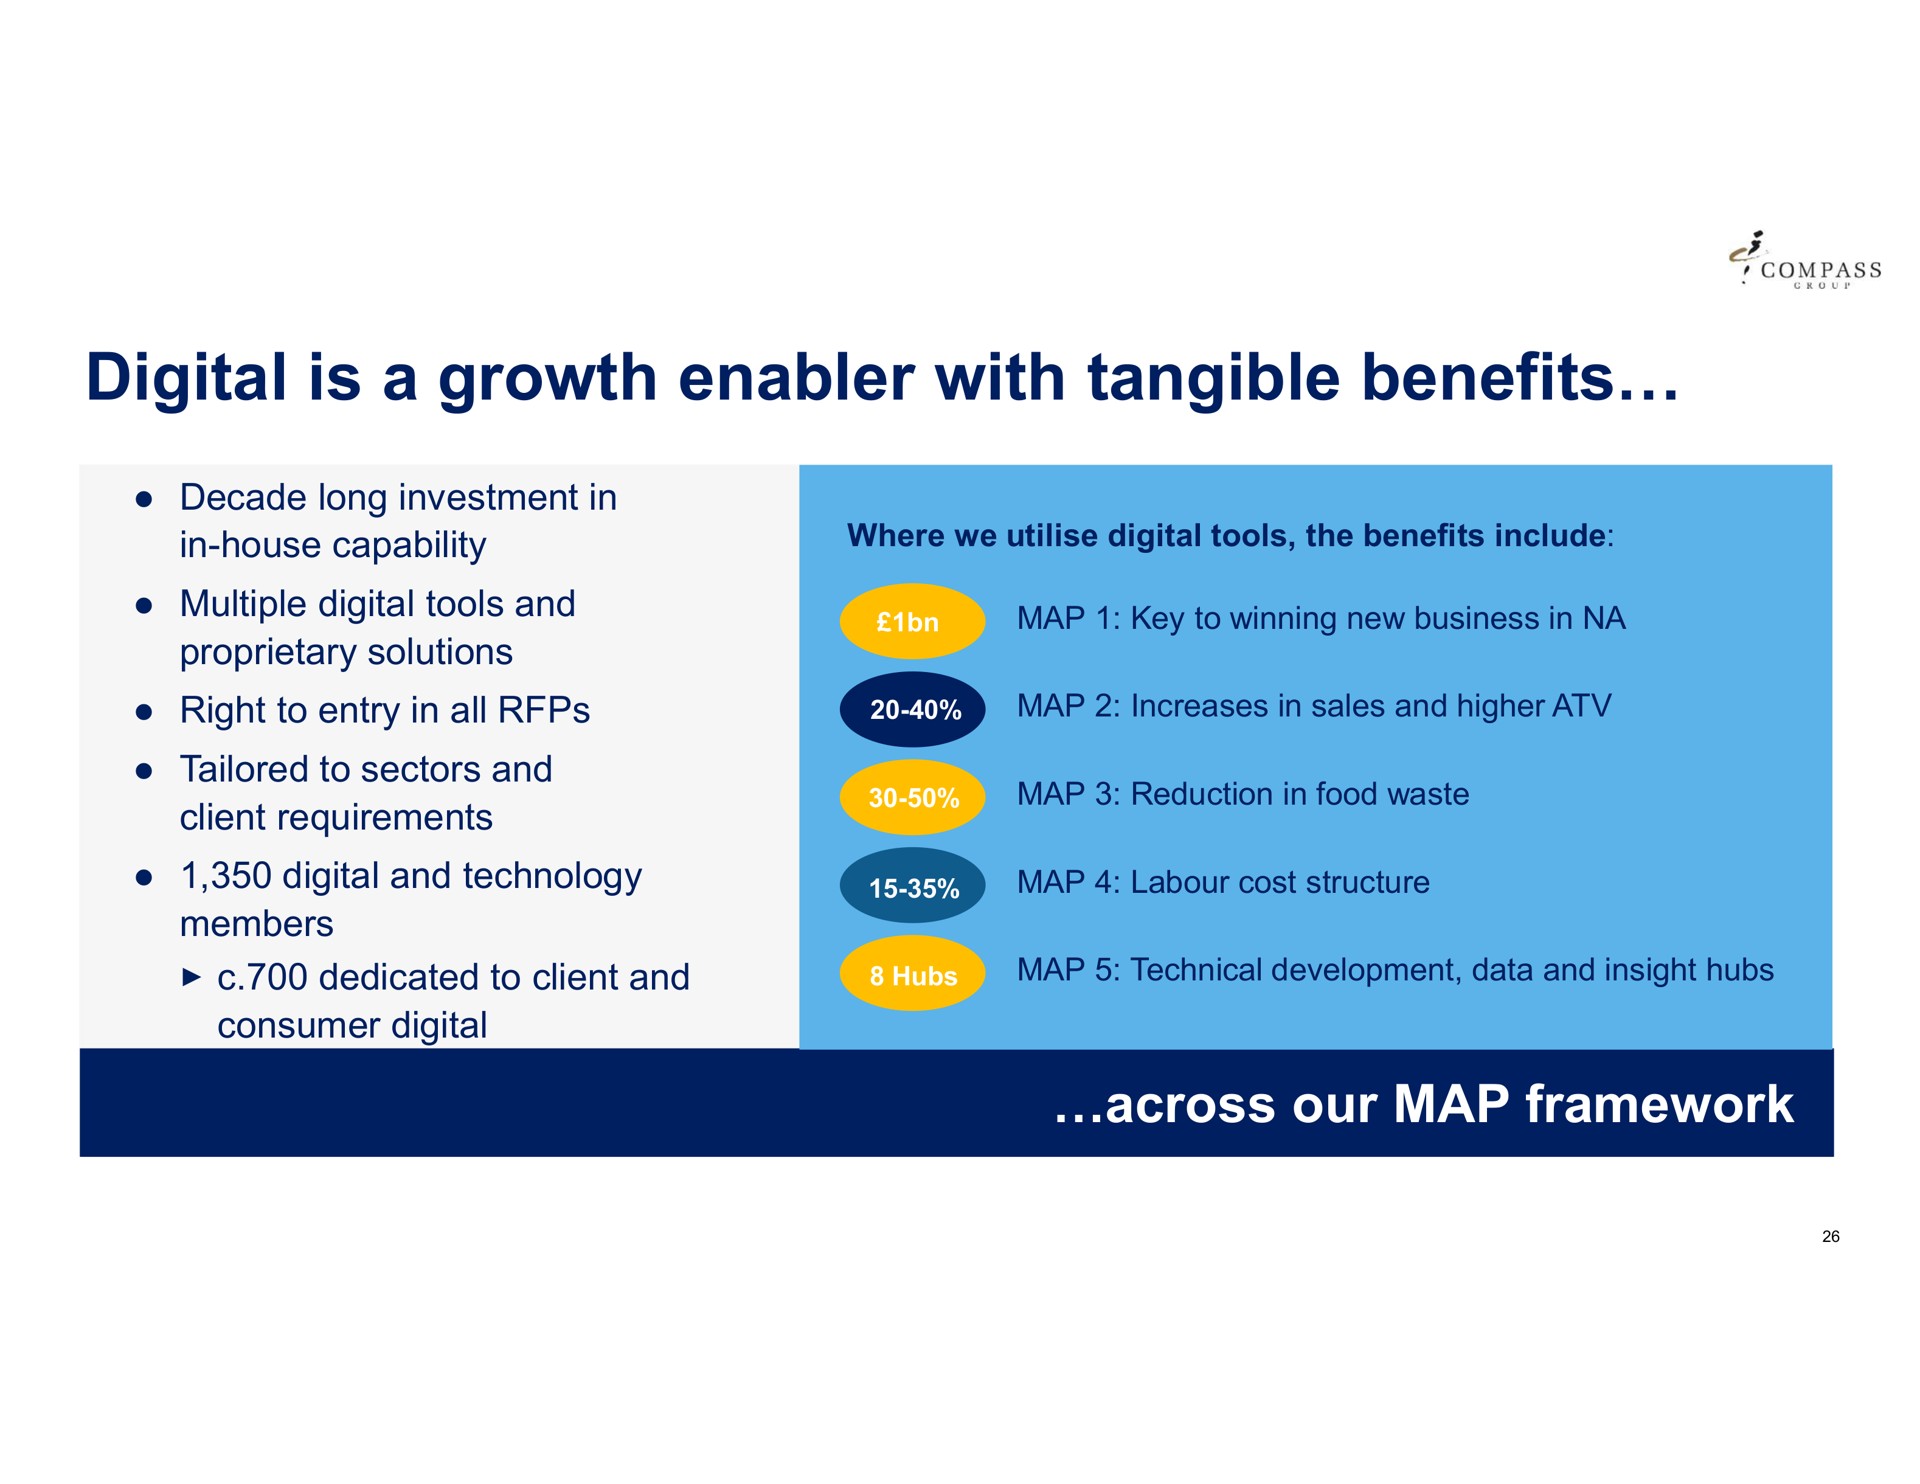 digital is a growth enabler with tangible benefits | Compass Group